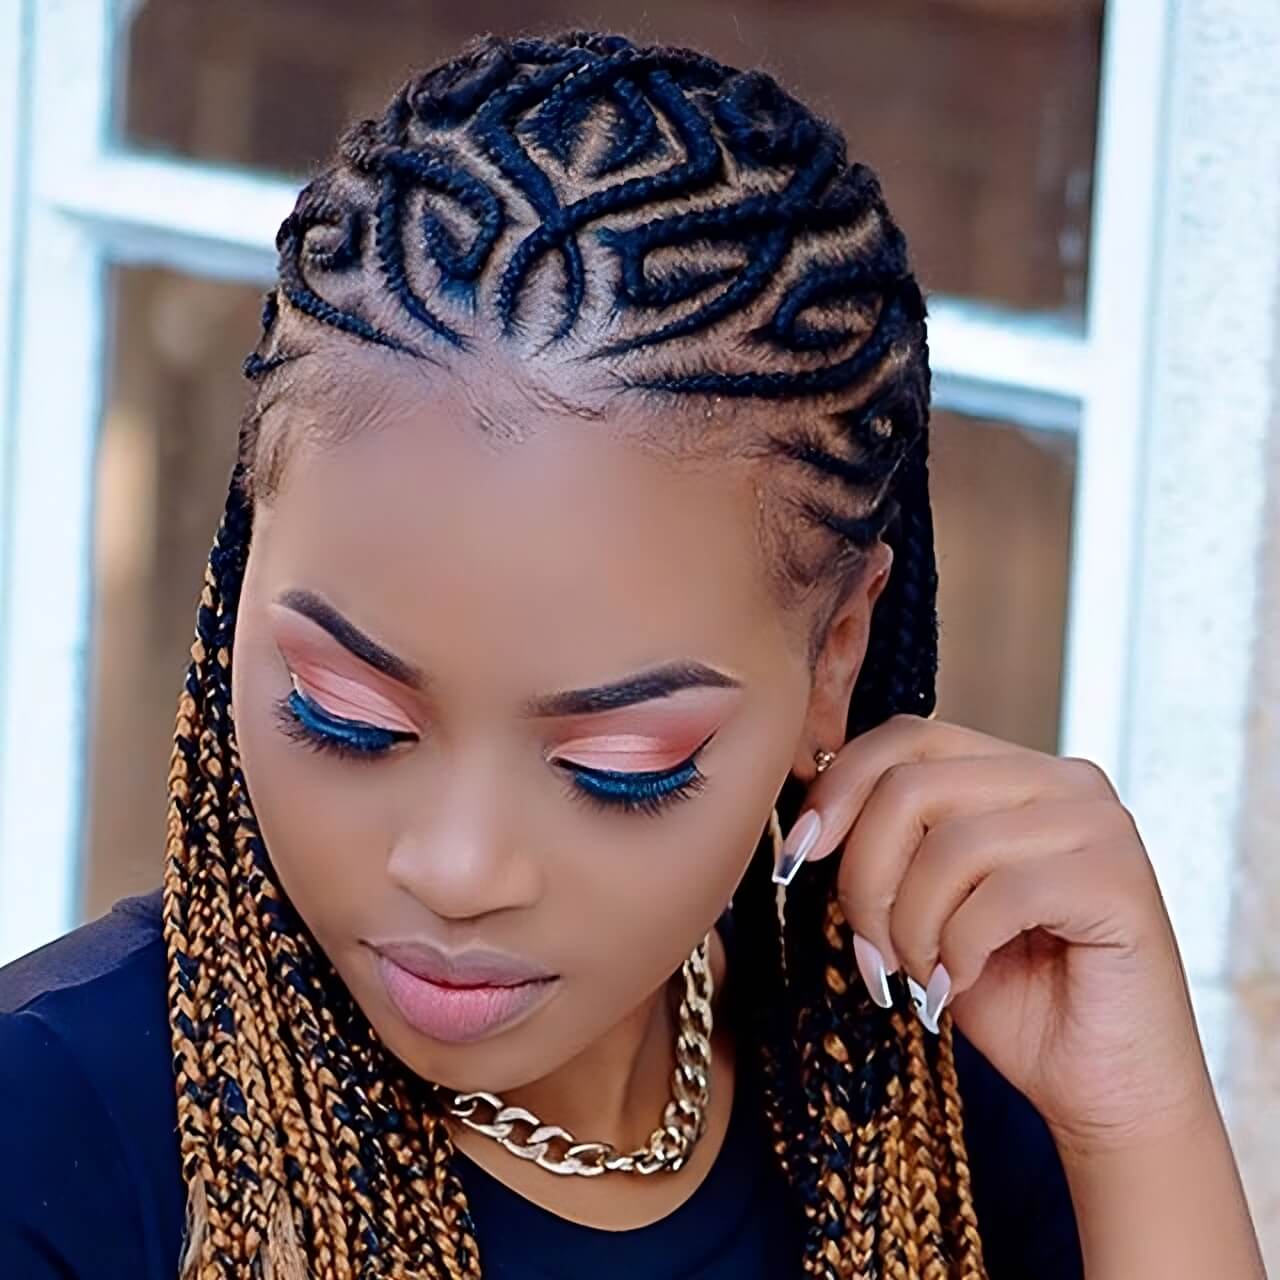 50 Trendy Braided Hairstyles To Instantly Glam Up Your Look - 313